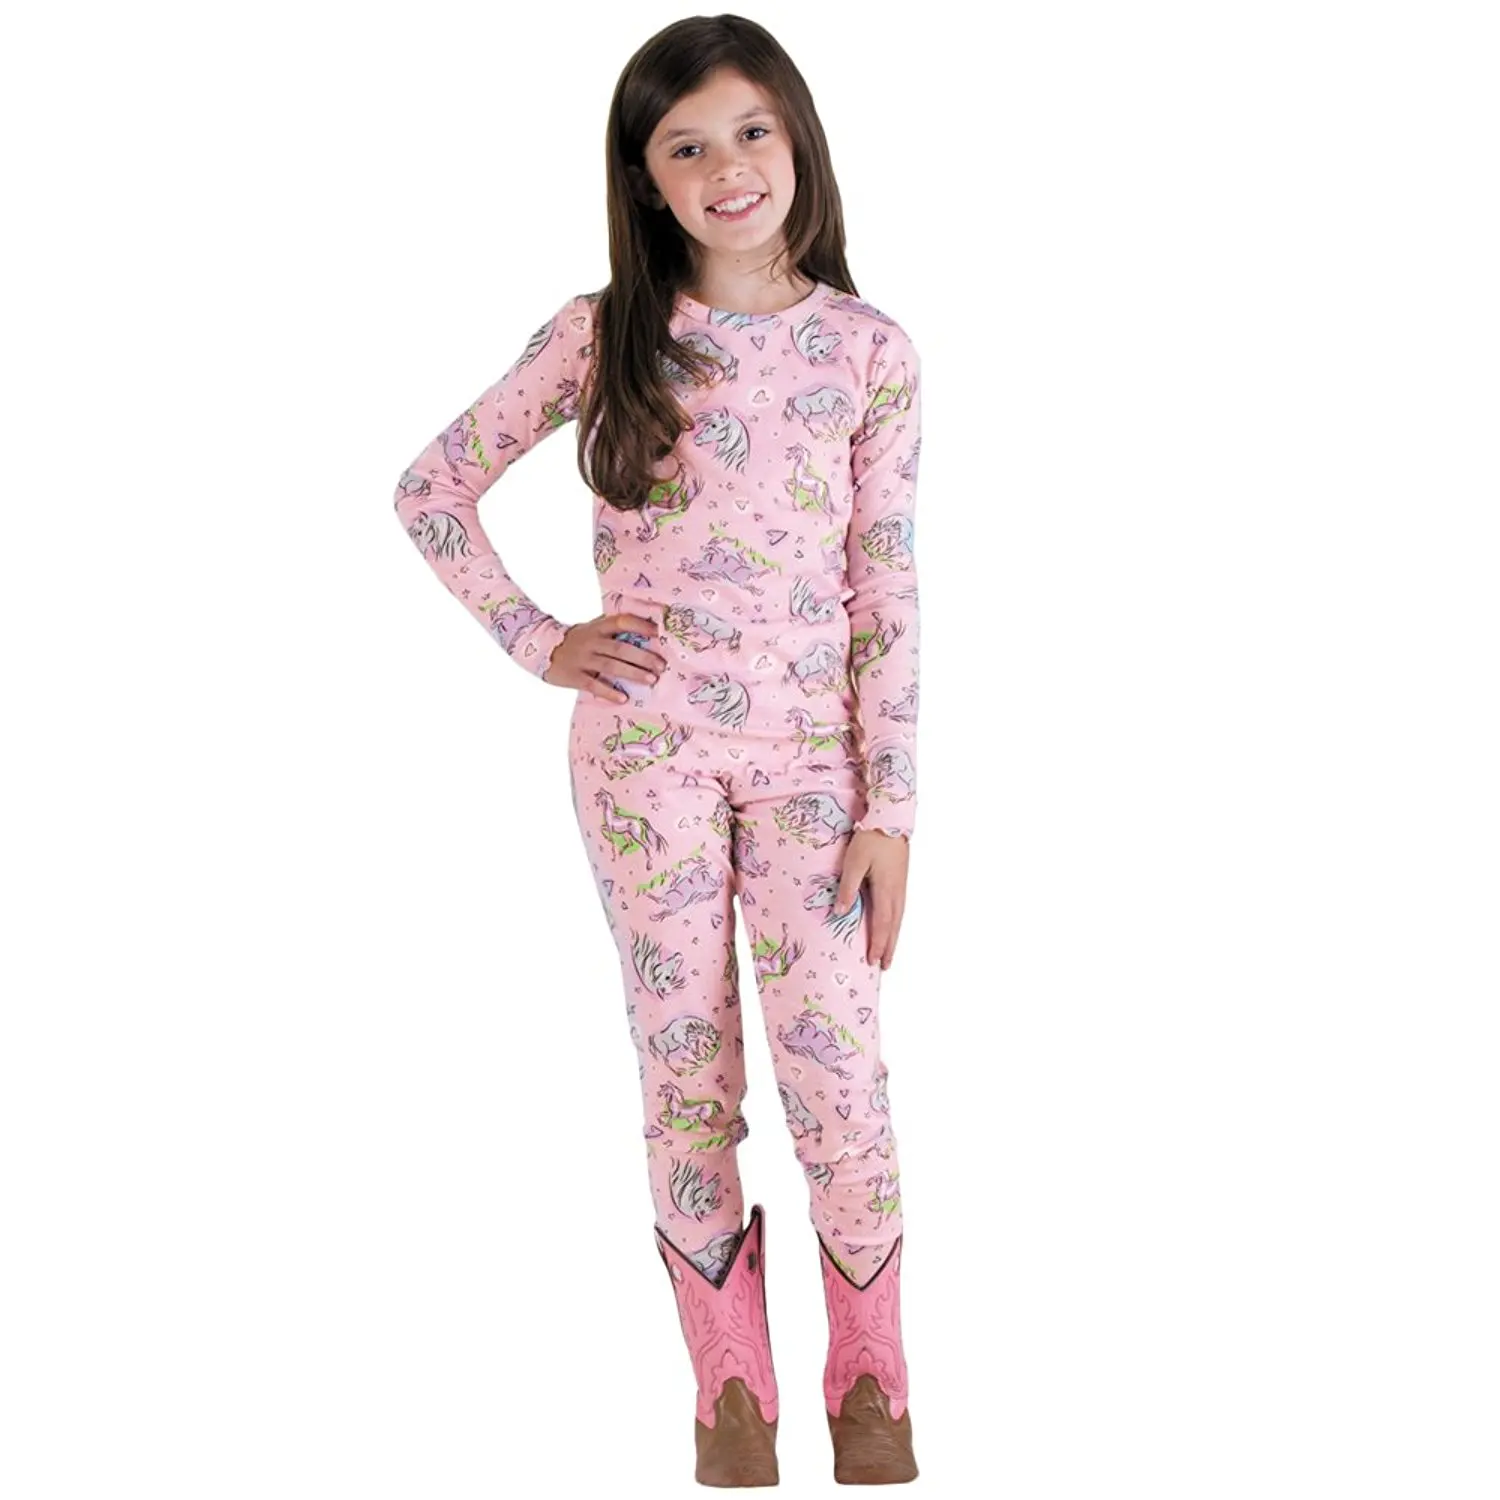 Buy Dreamy Horse Pink Pajama in Cheap Price on m.alibaba.com.